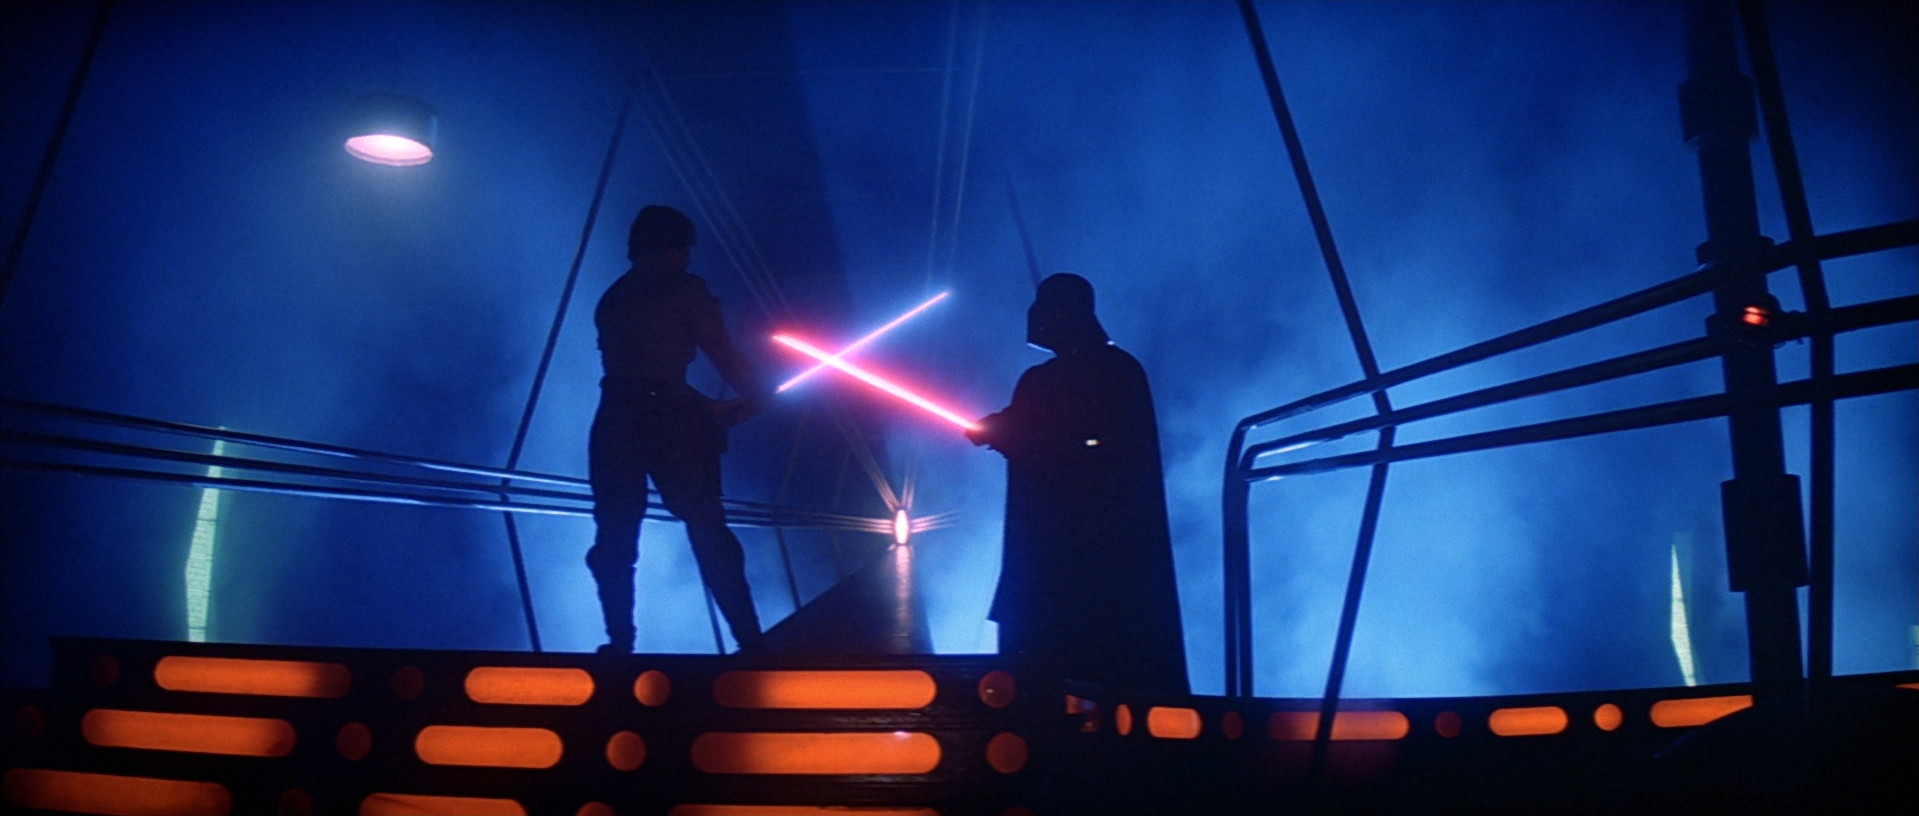 Amazing Star Wars Episode V: The Empire Strikes Back Pictures & Backgrounds